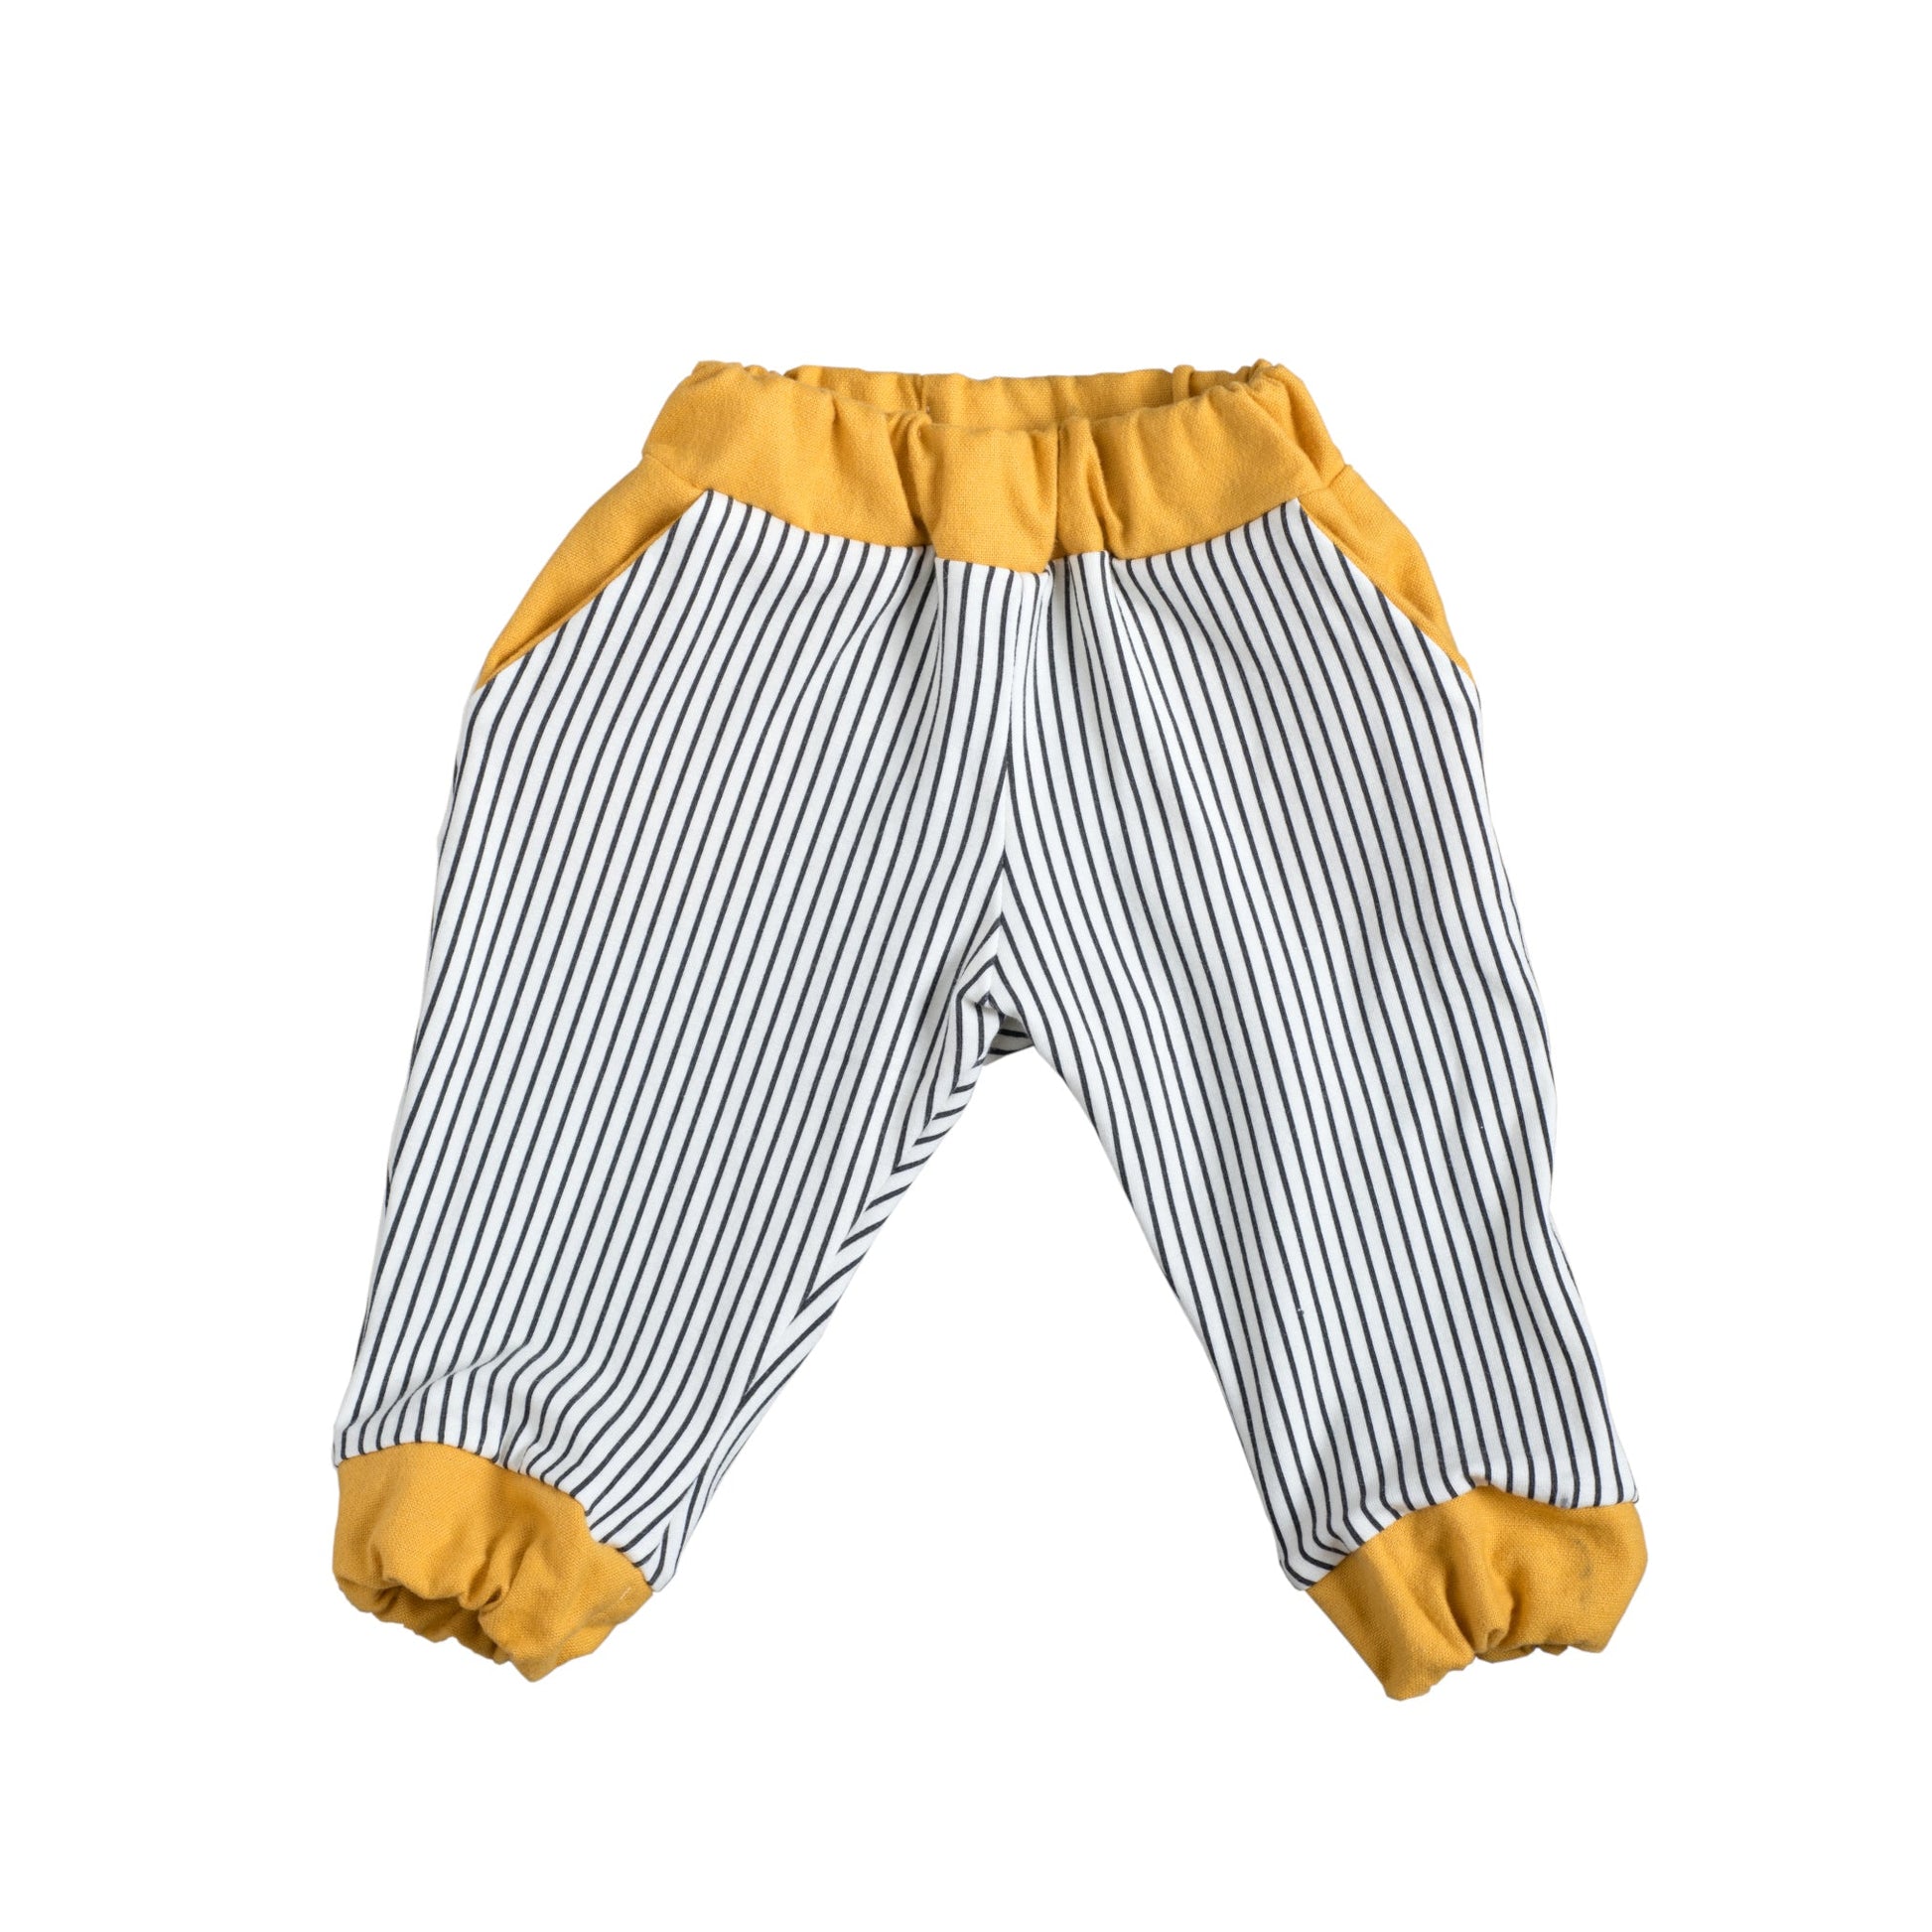 Jersey Striped trousers with pockets and elastic, organic